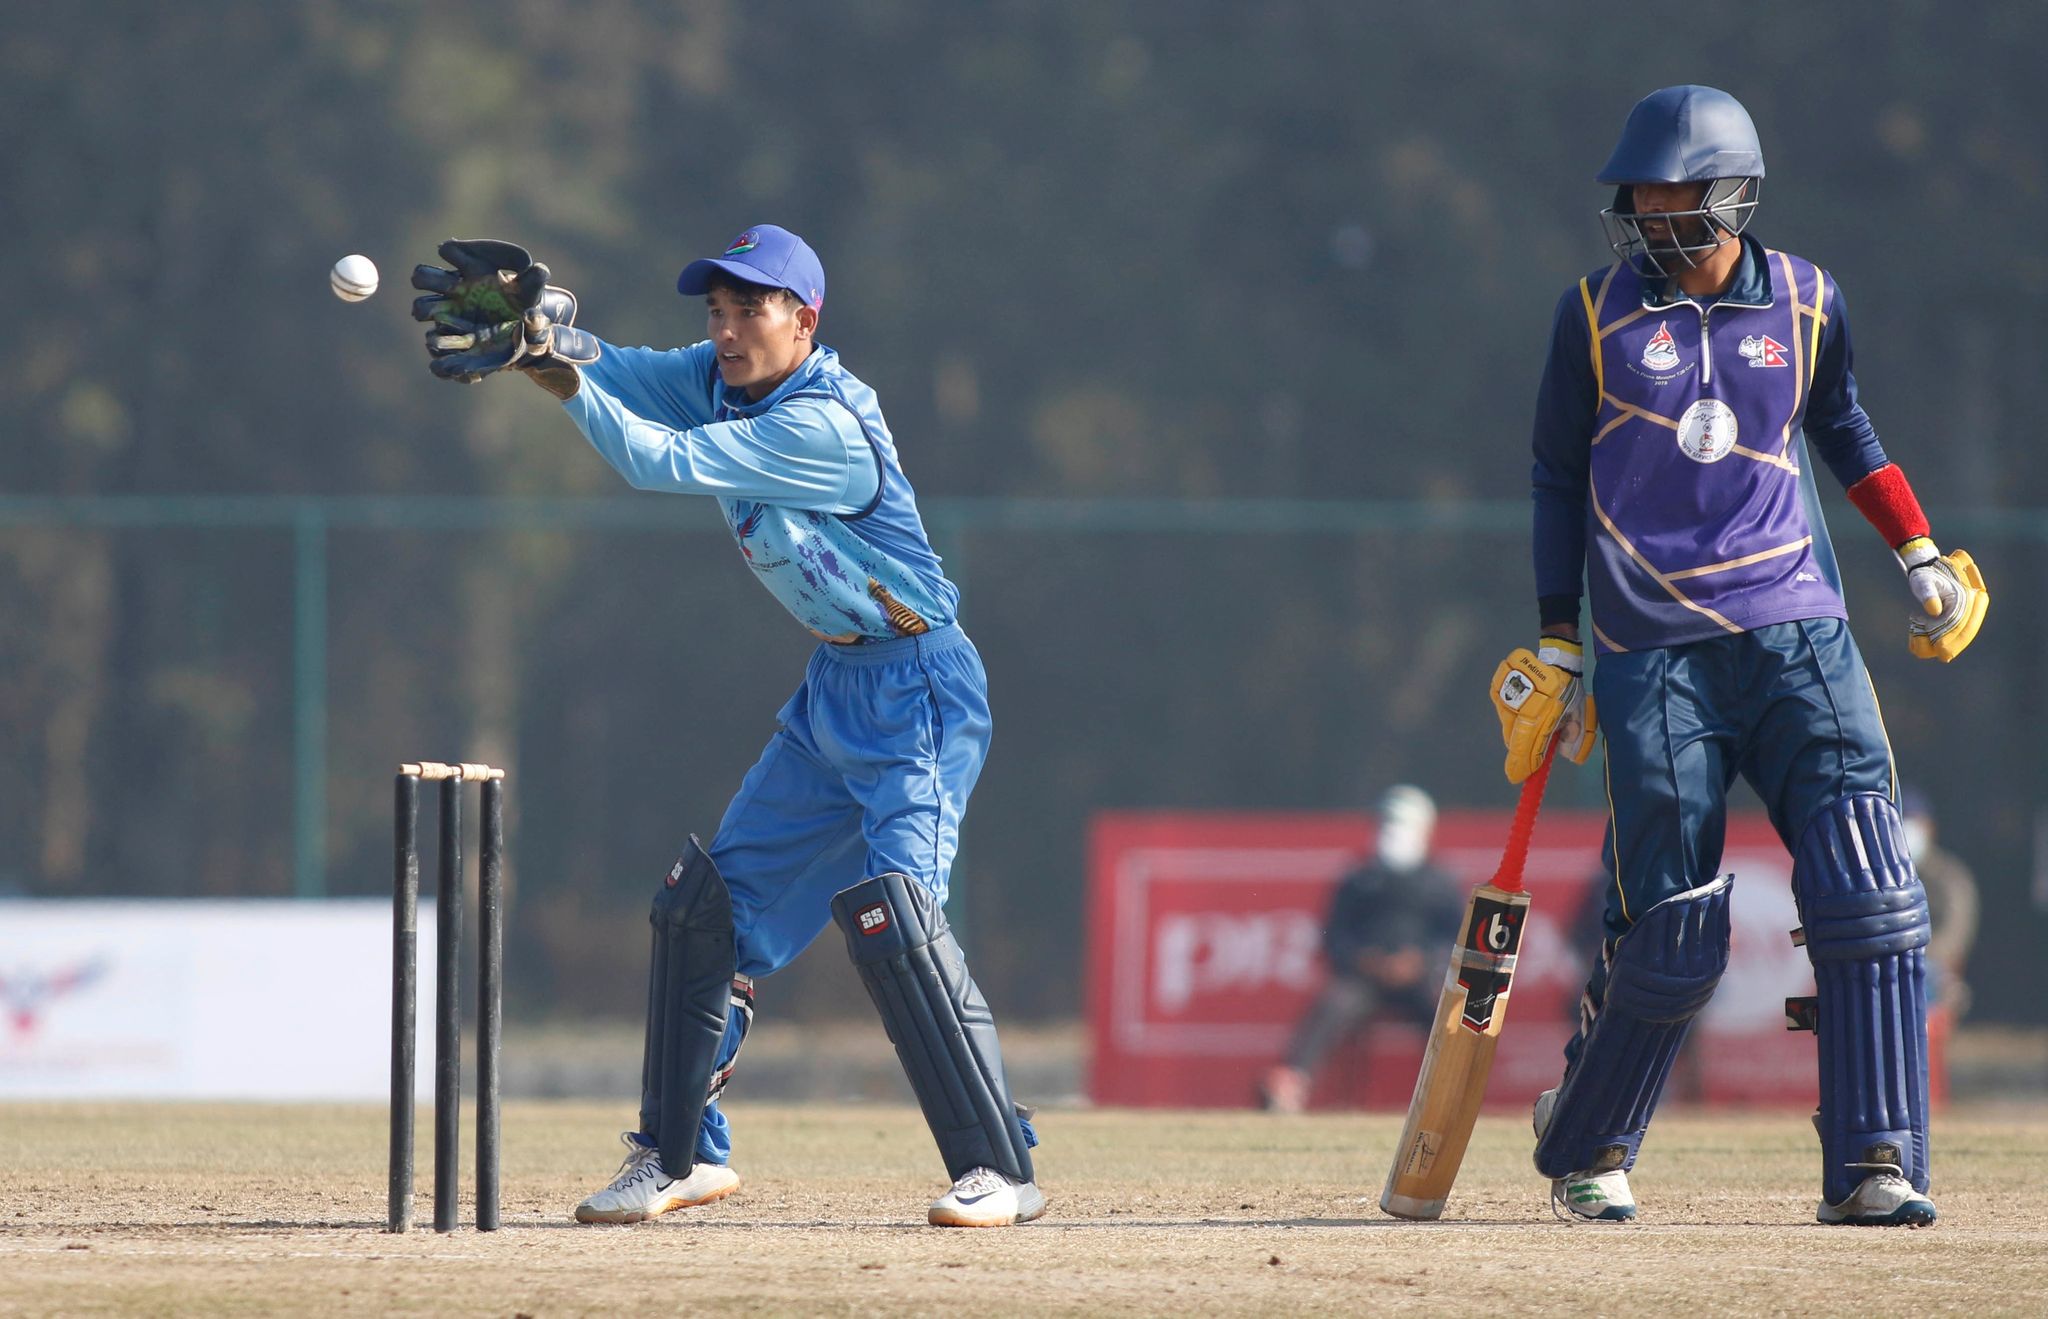 nepal-police-club-reaches-final-of-pm-cup-t-20-cricket-championship